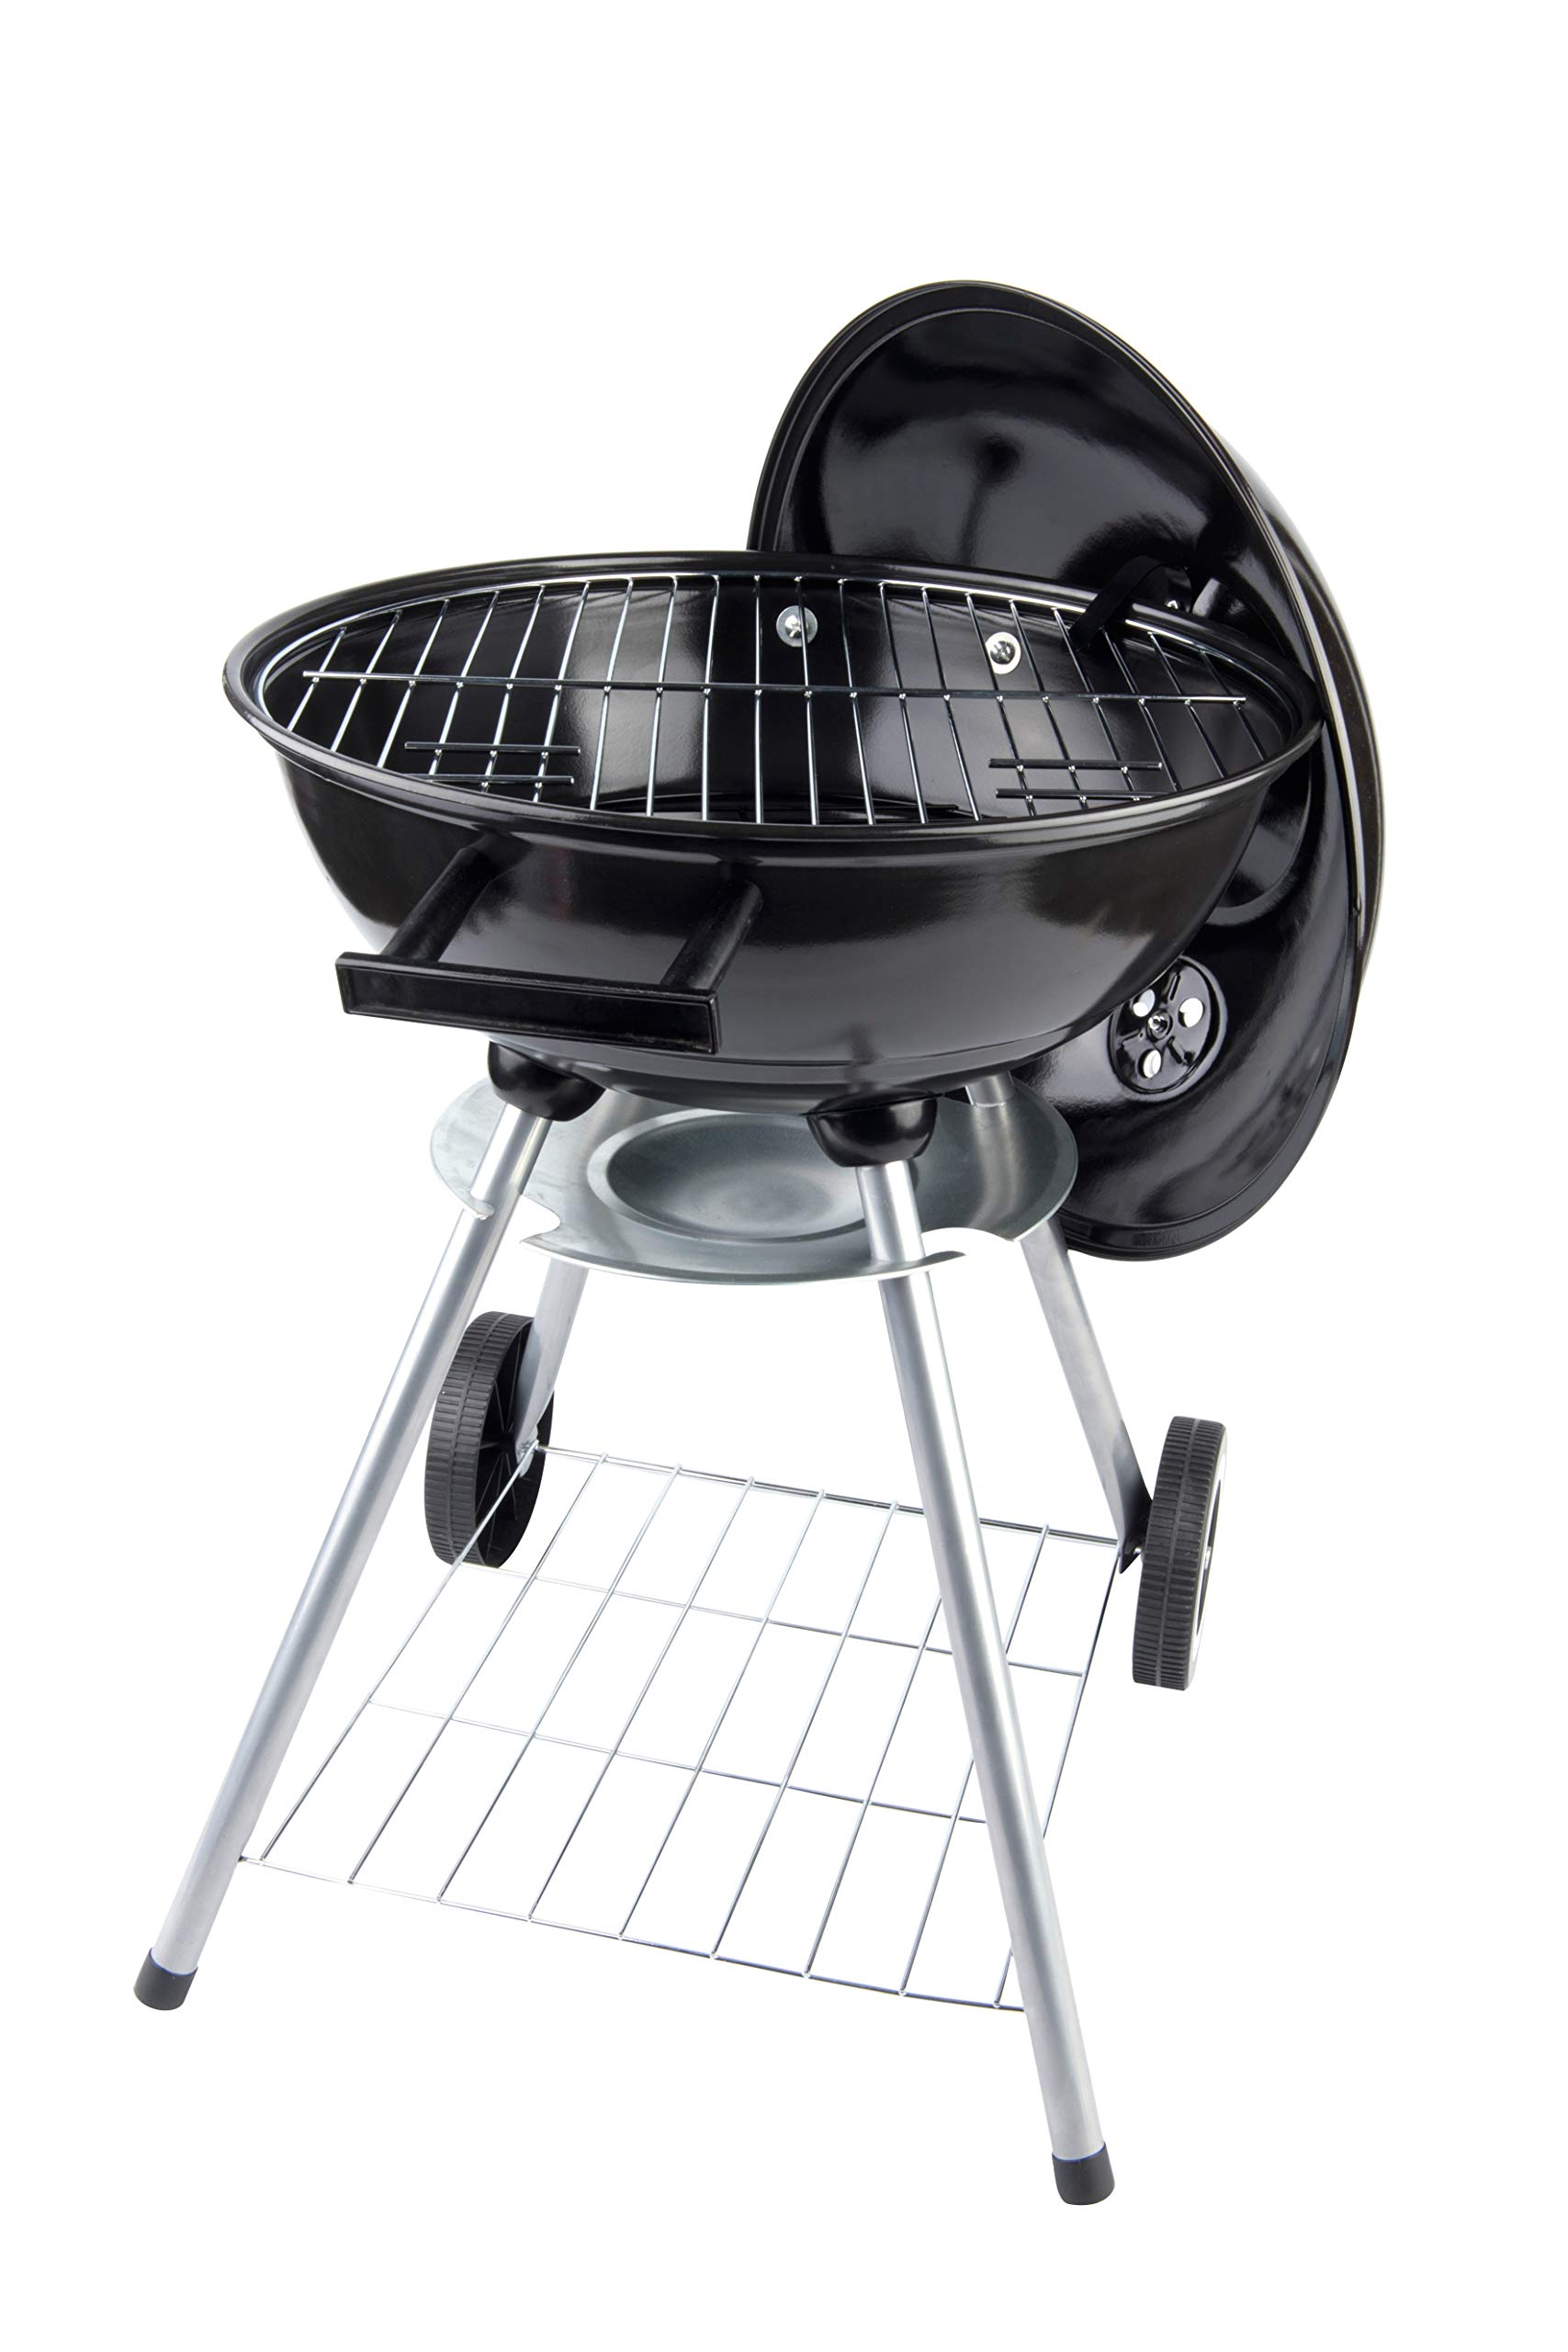 BBQ Collection Grill Holzkohlengrill, schwarz / silber, 50 x 49 x 73 cm